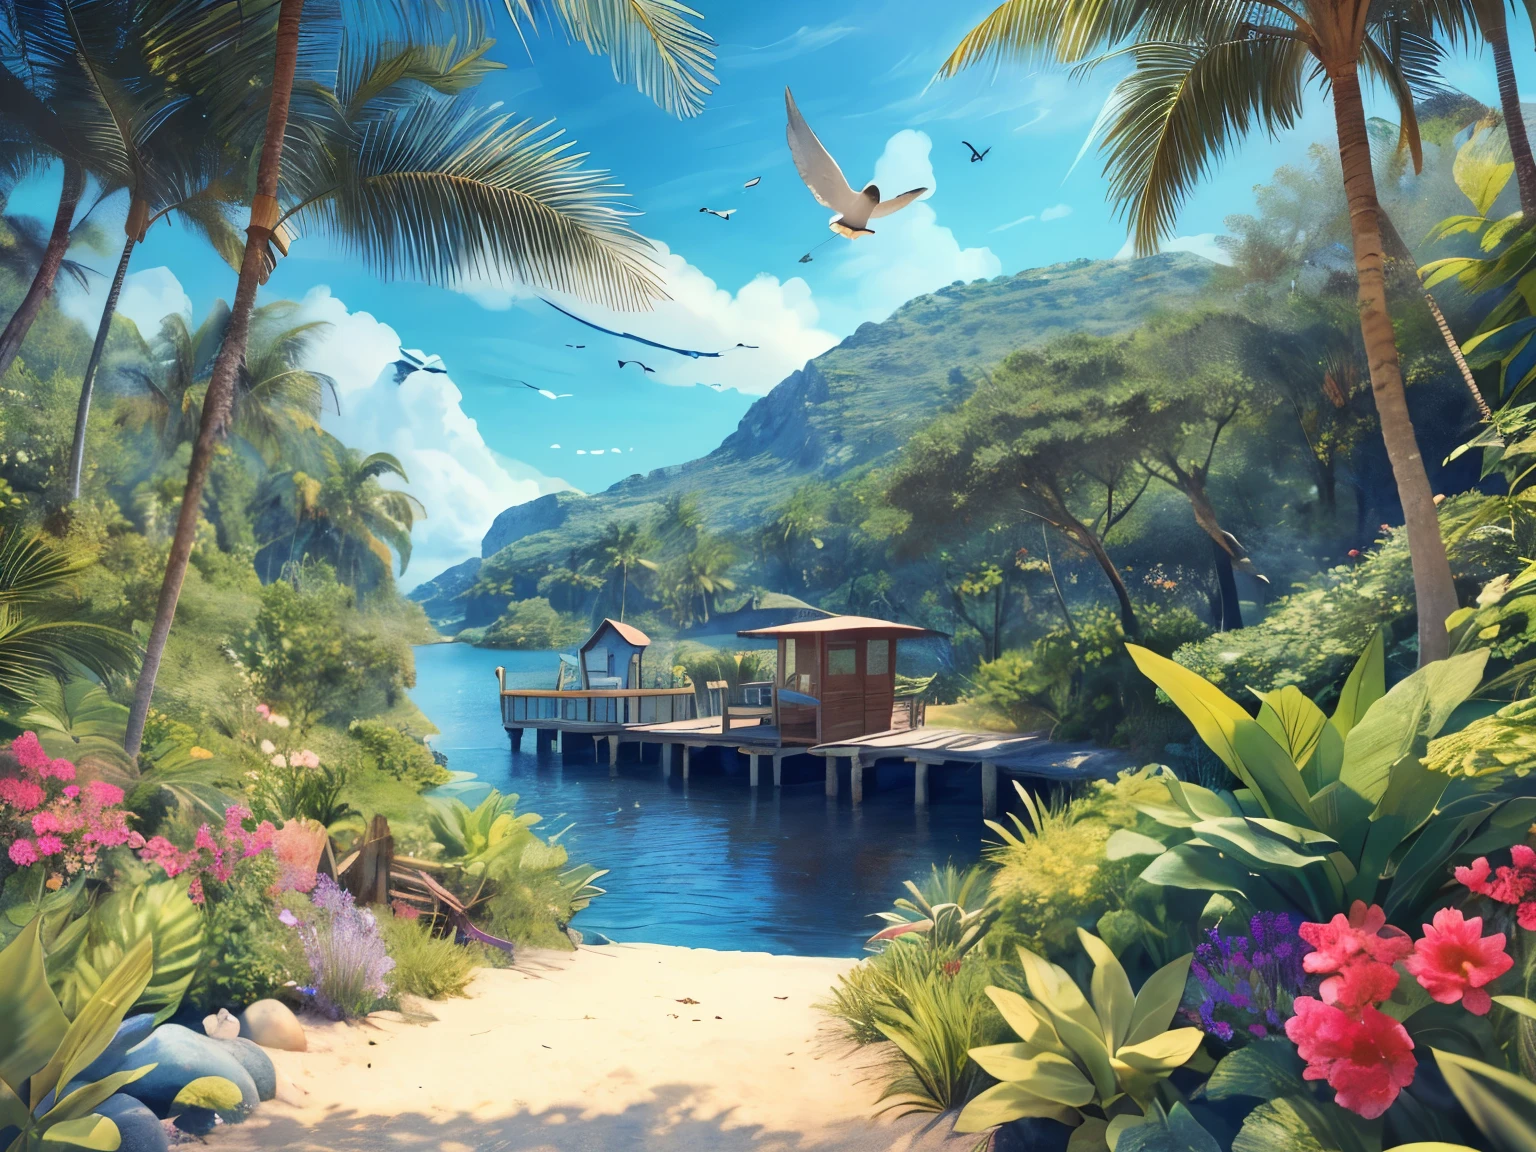 (best quality:1.2), ultra-detailed, realistic:1.37, masterpiece:1.2, Whitethorn, deserted island, small islands, small house, serenity, tranquil, peaceful atmosphere, gentle waves, vibrant greens and blues, sunlight filters through the leaves, crystal clear water, secluded beach, rocky cliffs, lush vegetation, birds chirping, footsteps on the sandy path, sound of crashing waves, birds flying in the sky, colorful flowers blooming, a cozy wooden cabin, hammock swaying in the breeze, wooden dock, boats moored in the distance, a path leading into the forest, palm trees swaying, seashells scattered on the shore.